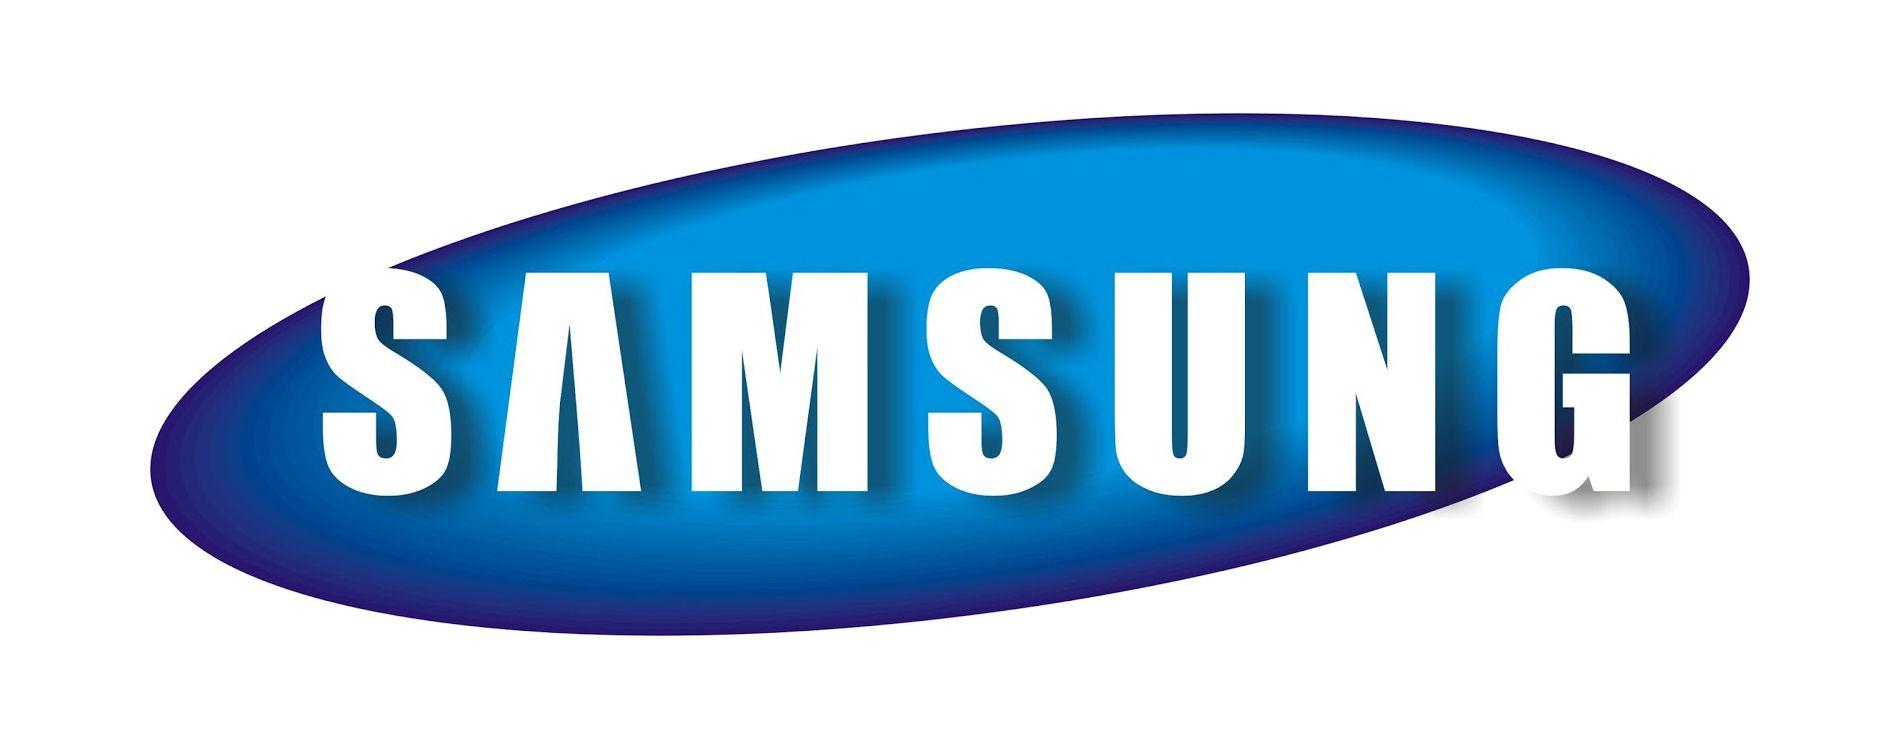 Samsung Logo - Samsung Logo, Samsung Symbol, Meaning, History and Evolution